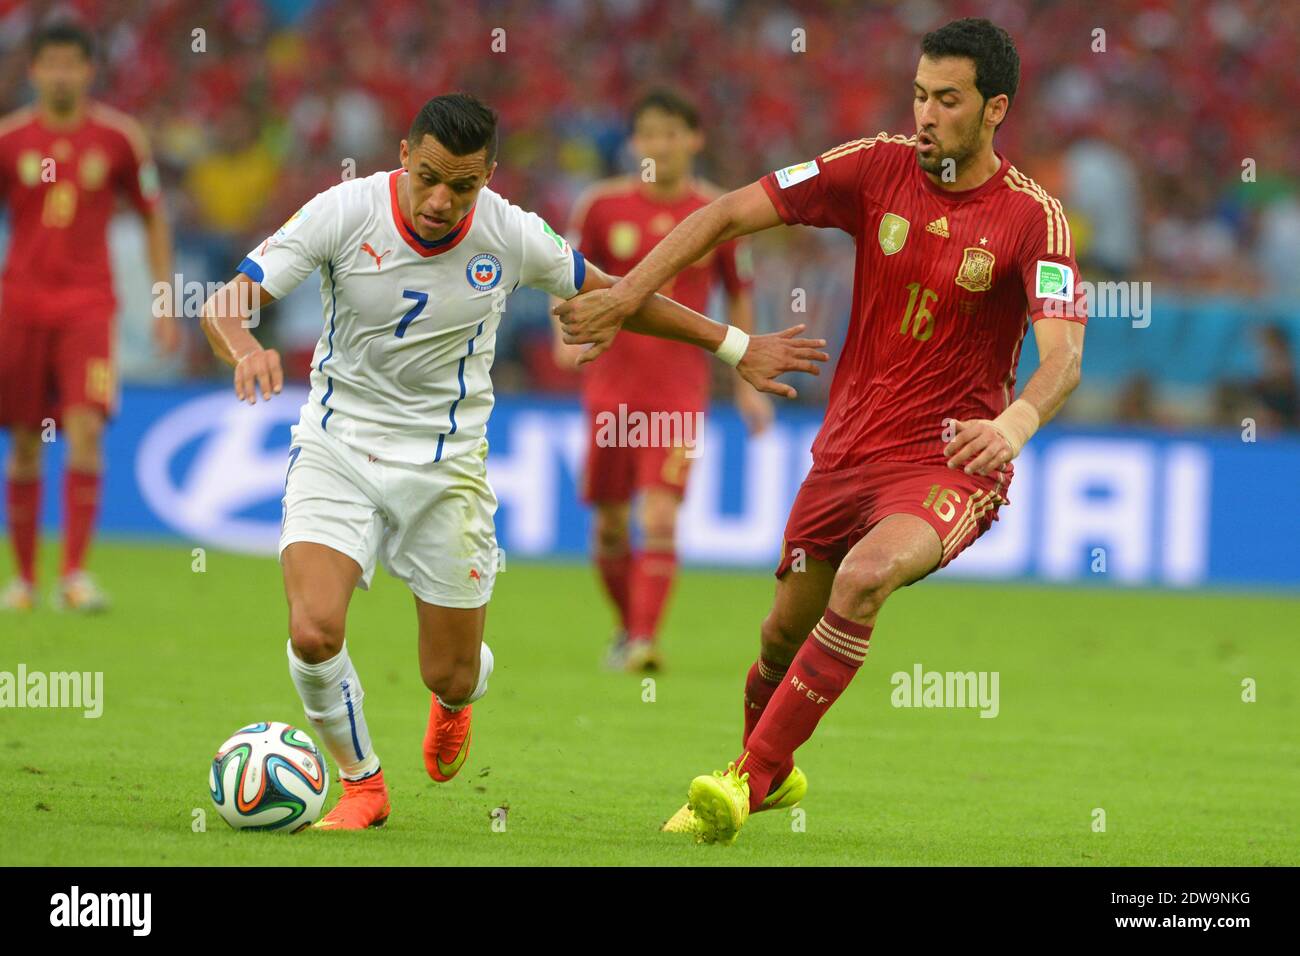 Spain's Sergio Busquets battling Chile's Alexis Sanchez during Soccer World Cup 2014 First round Group B match Spain v Chile at Maracana Stadium, Rio de Janeiro, Brazil , on June 18, 2014. Chile won 2-0 and ousted the defending champions from the competition. Photo by Henri Szwarc/ABACAPRESS.COM Stock Photo